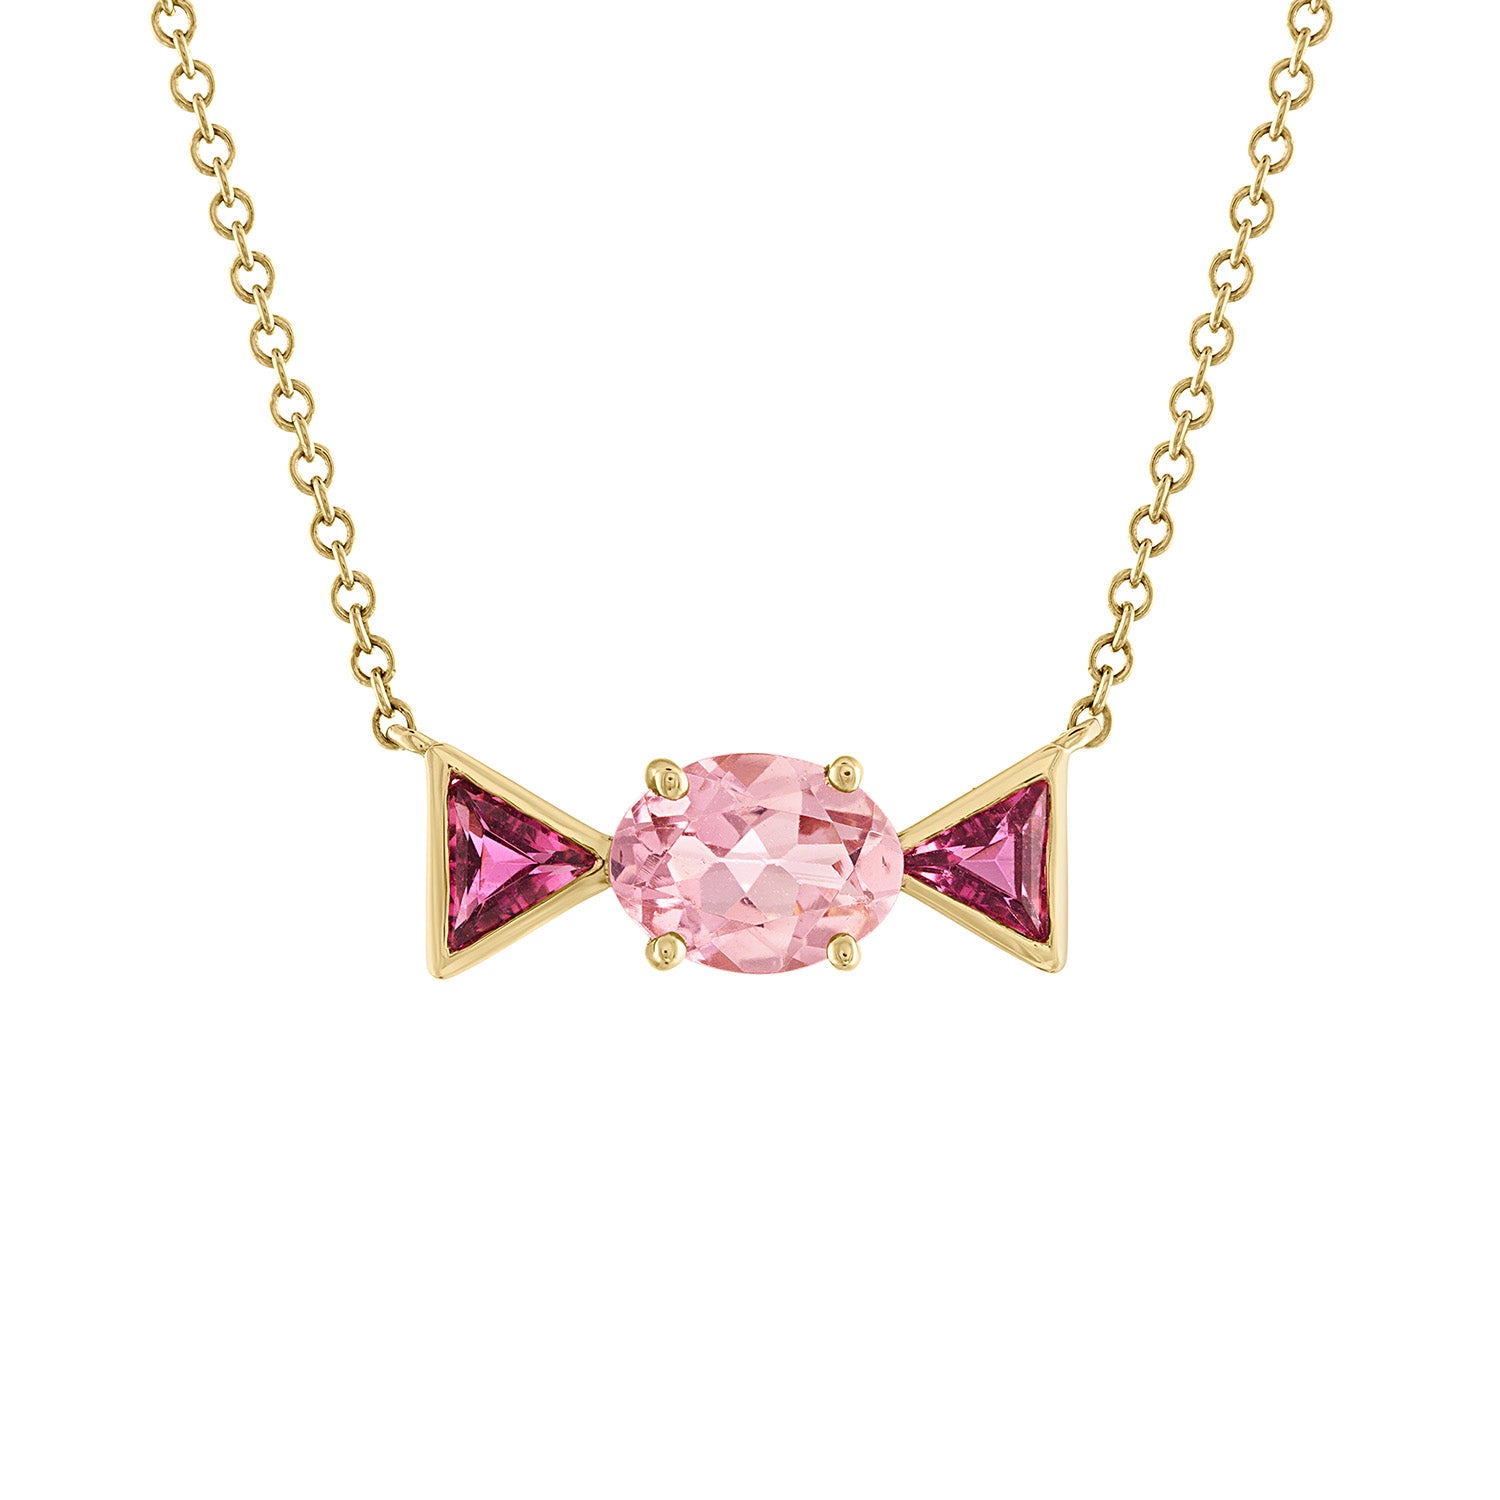 candy necklace made up of pink tourmalines set in 14k yellow gold